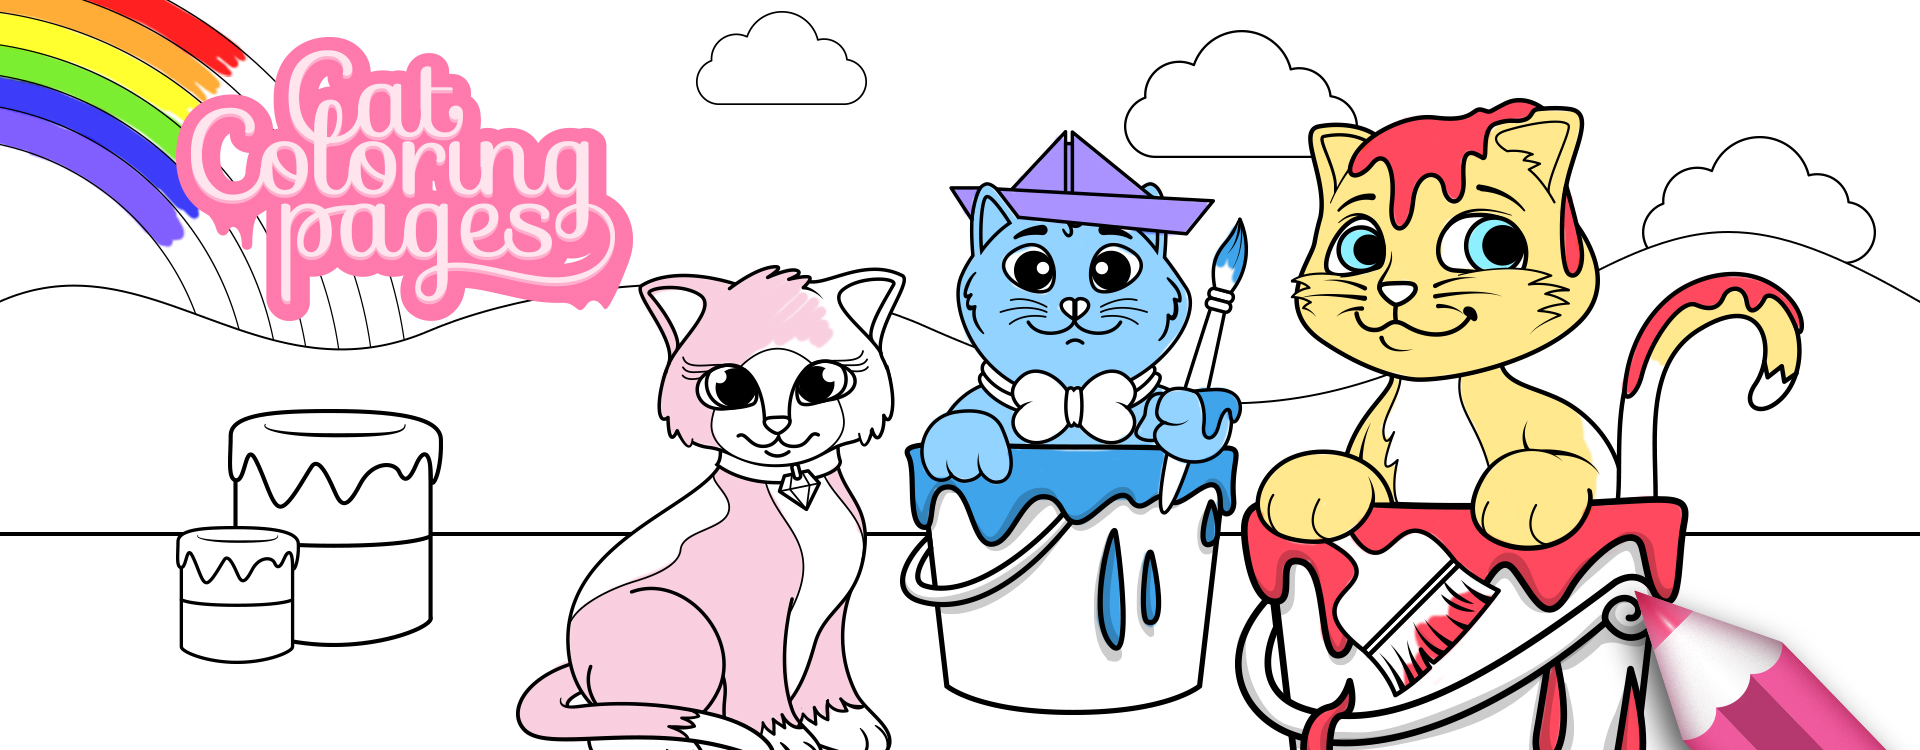 Download Cat Coloring Pages - Unity Connect